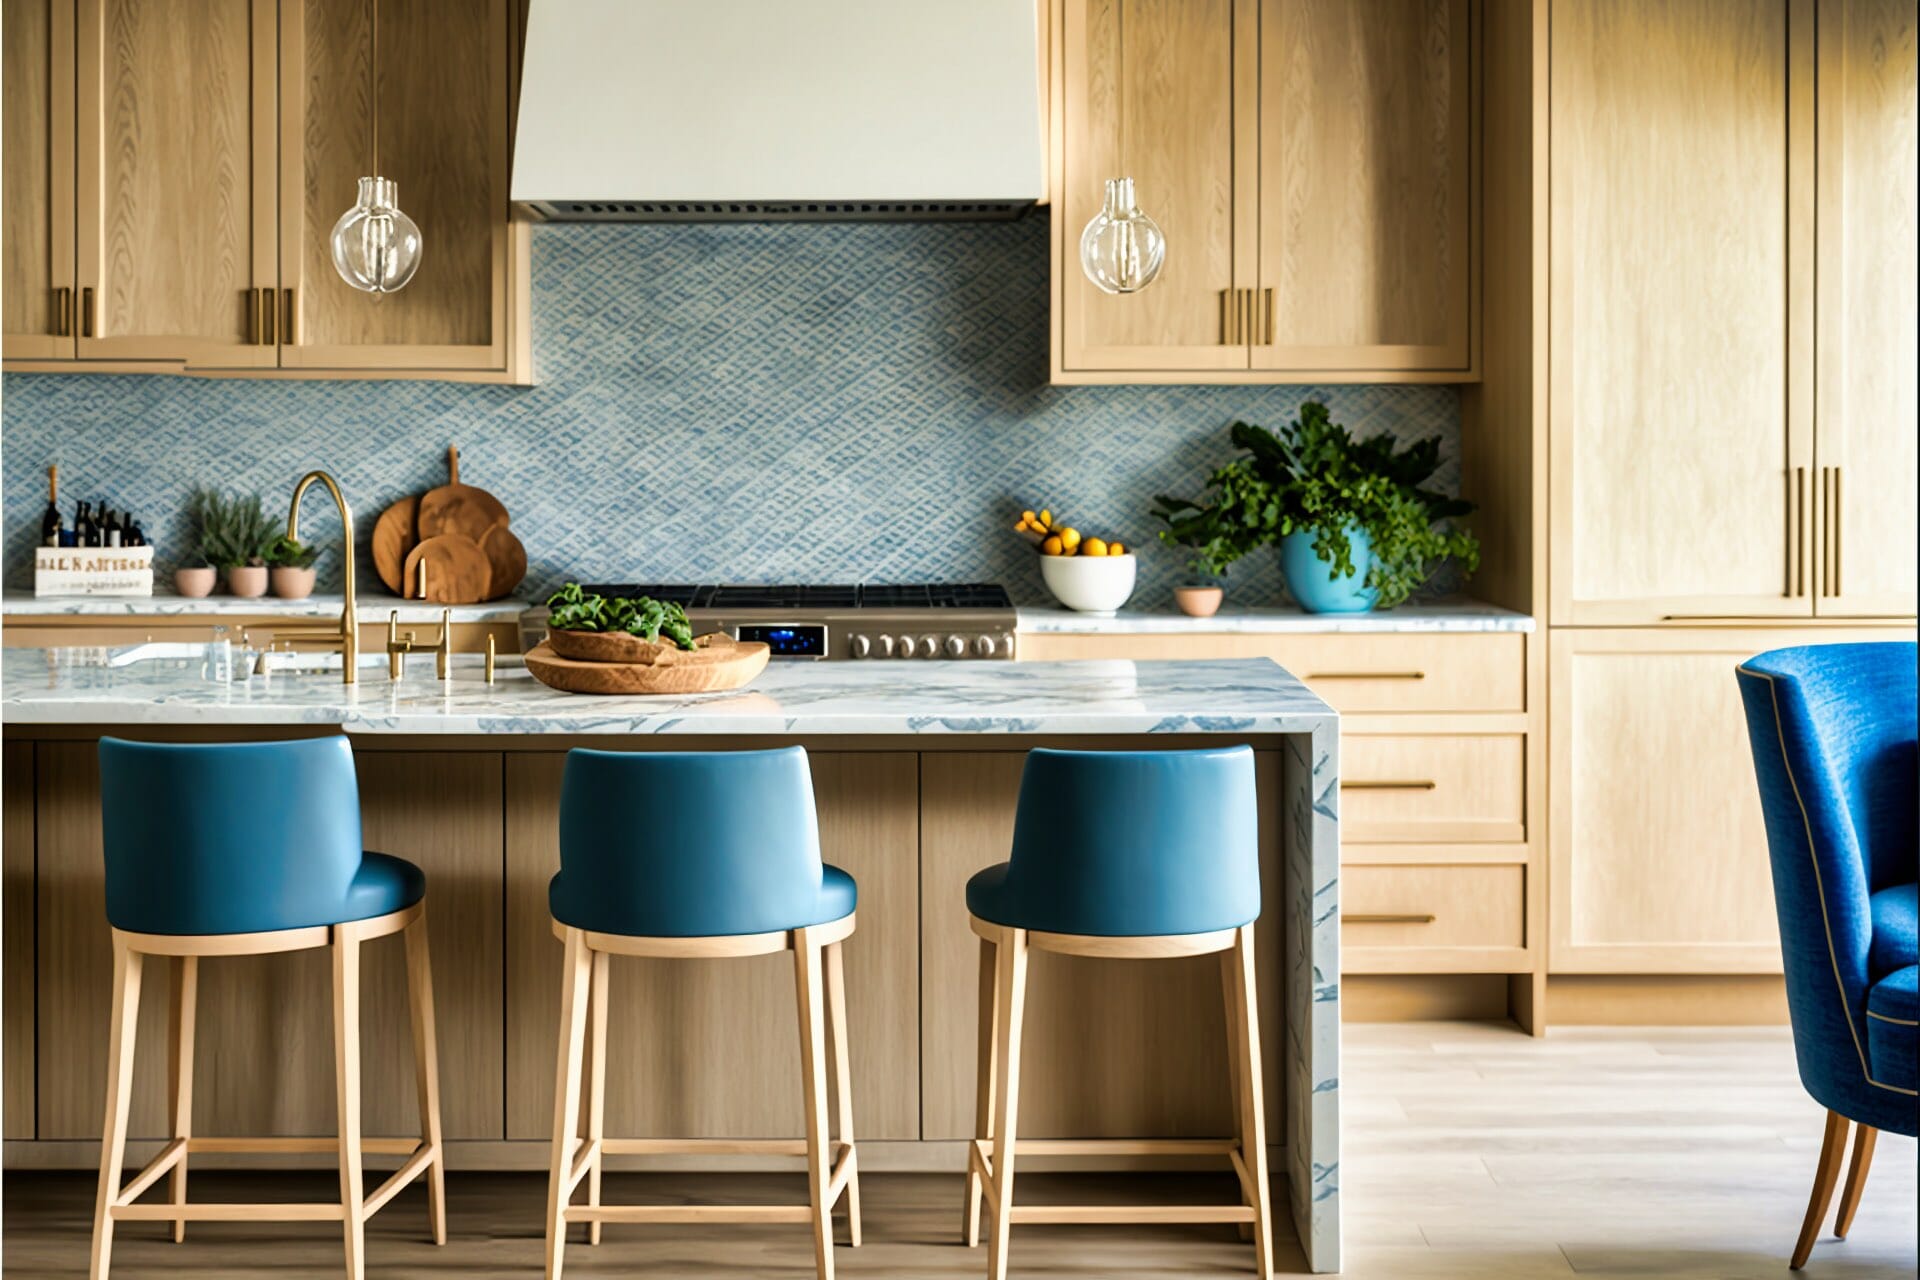 A Beachy Kitchen Featuring Light Oak Cabinetry, A Blue Tile Backsplash, And A Large Marble Countertop Island.